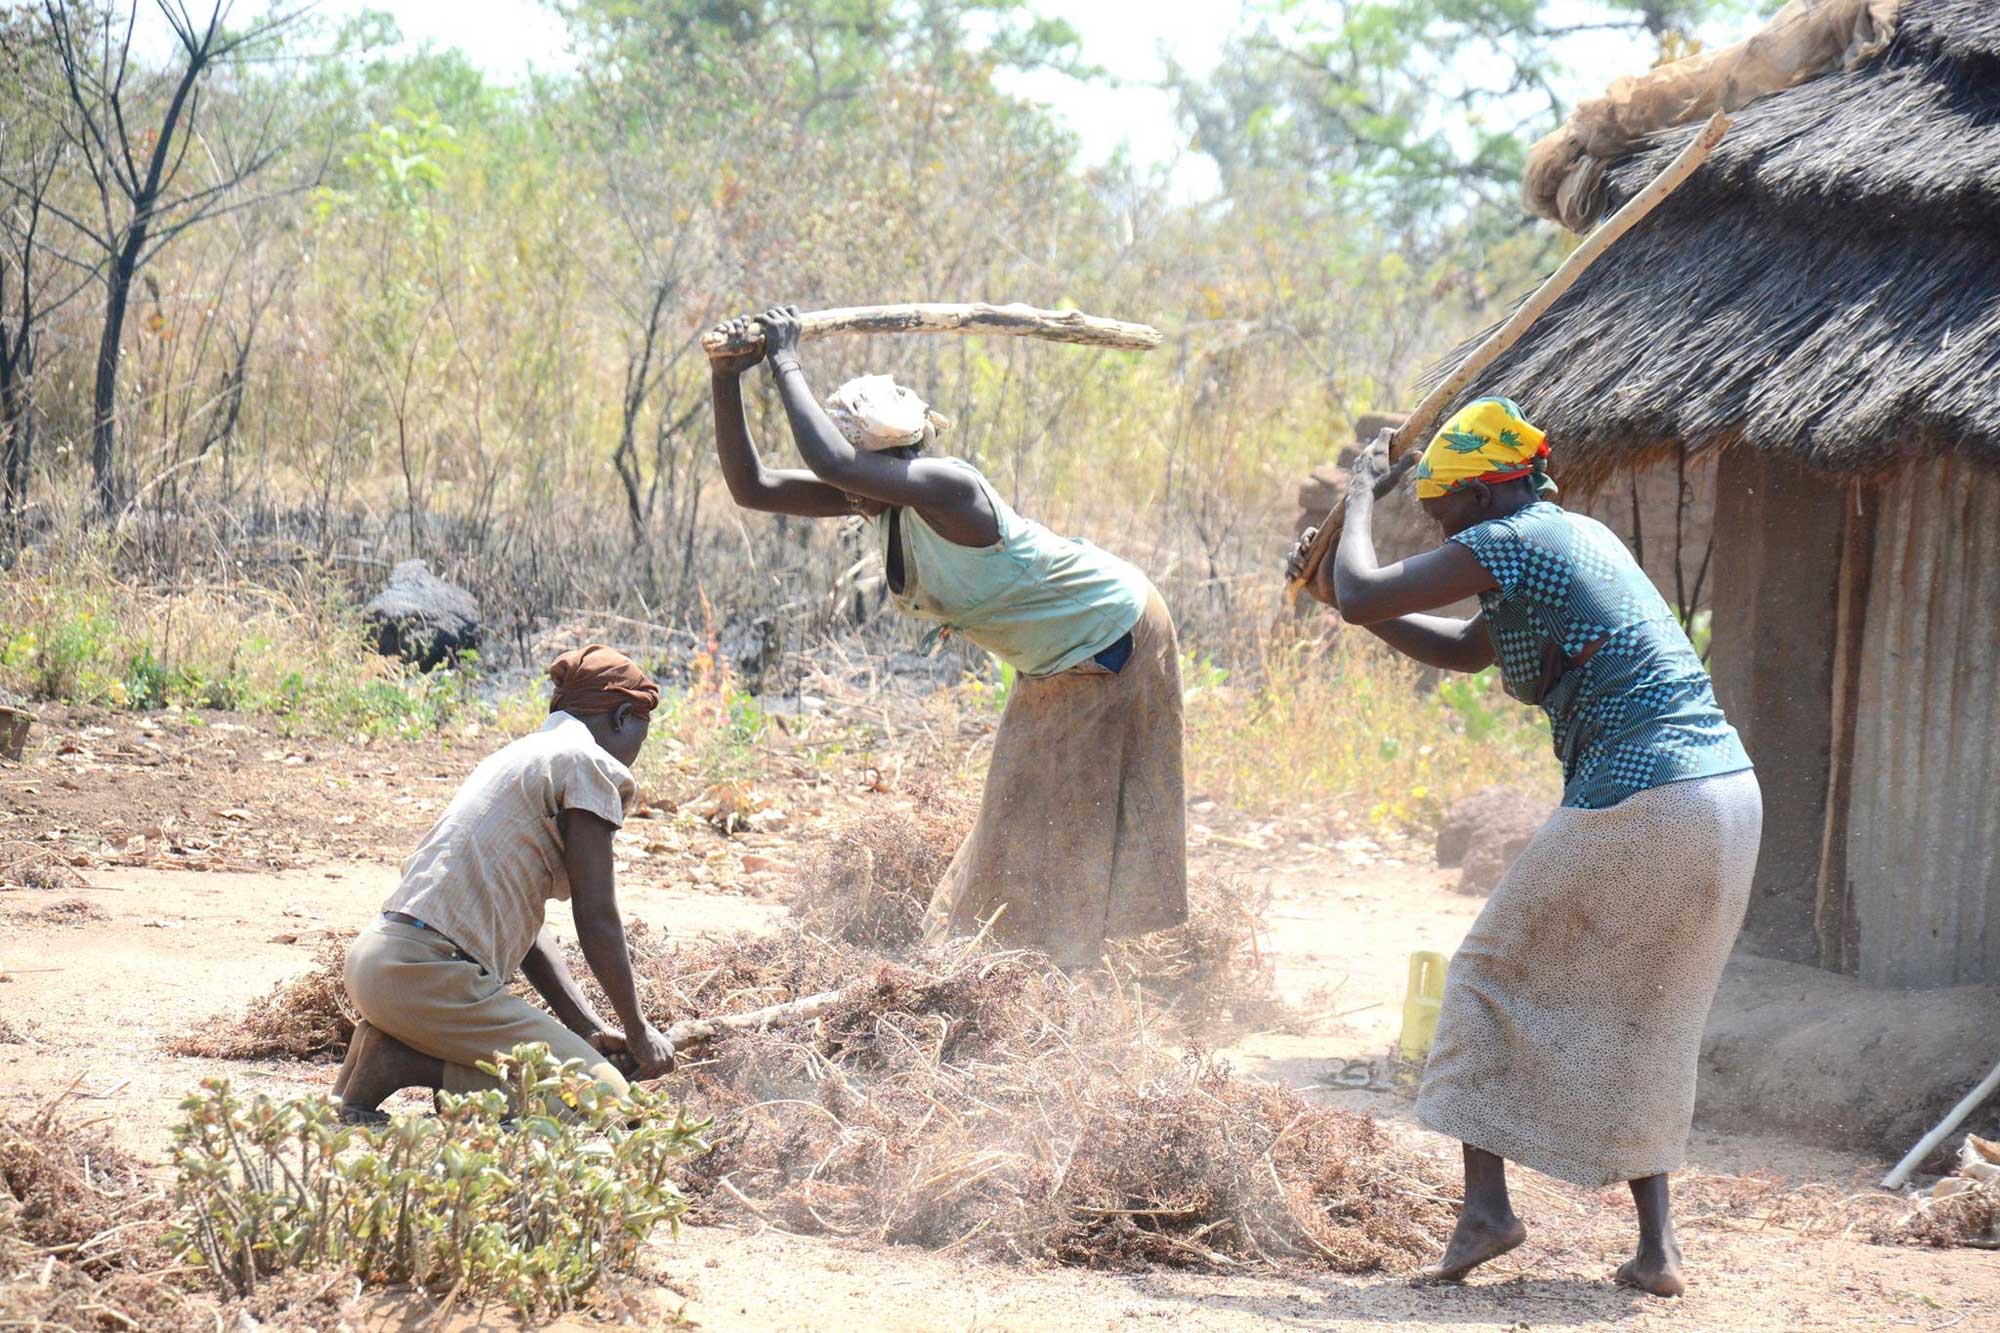 Photograph of women pounding sorghum in Uganda. The photo shows three women with thick wooden sticks hitting a pile of sorghum. Two of the women are standing with the sticks held up behind them, ready to swing down. One woman is kneeling and has brought her stick down on the plants. The women are wearing kercheifs over their hair, sleeveless or cap-sleeved shirts, off-white skirts, and no shoes. A hut with thatched roof can be seen on the left side of the image.